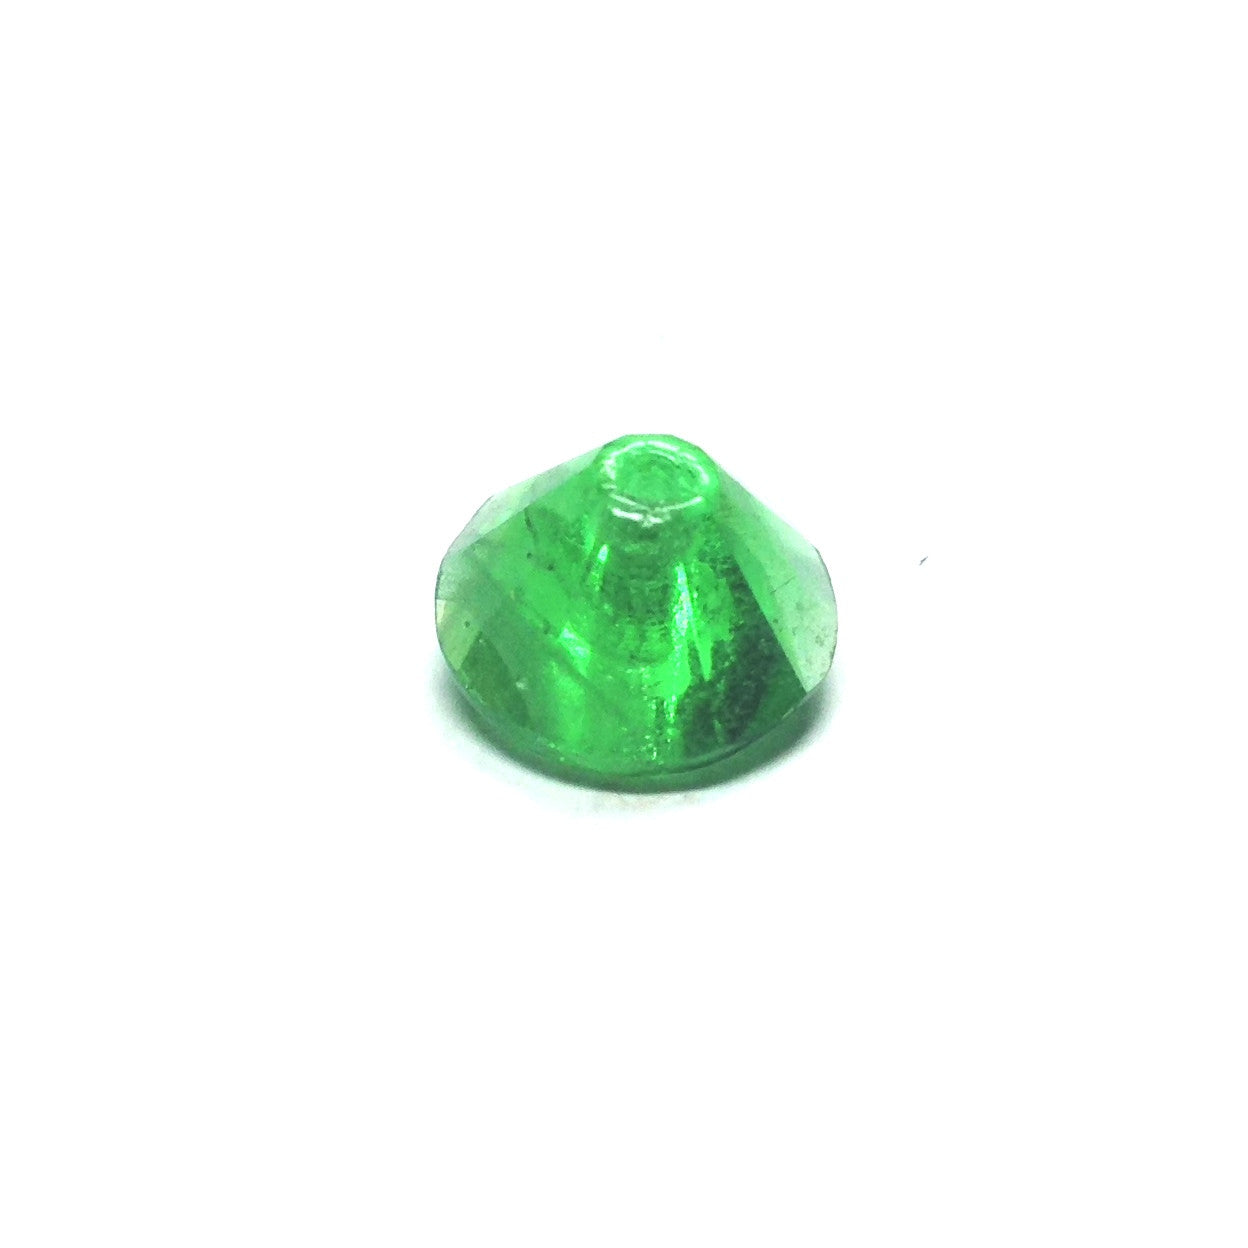 8MM Emerald Green Faceted Pyramid Bead (144 pieces)